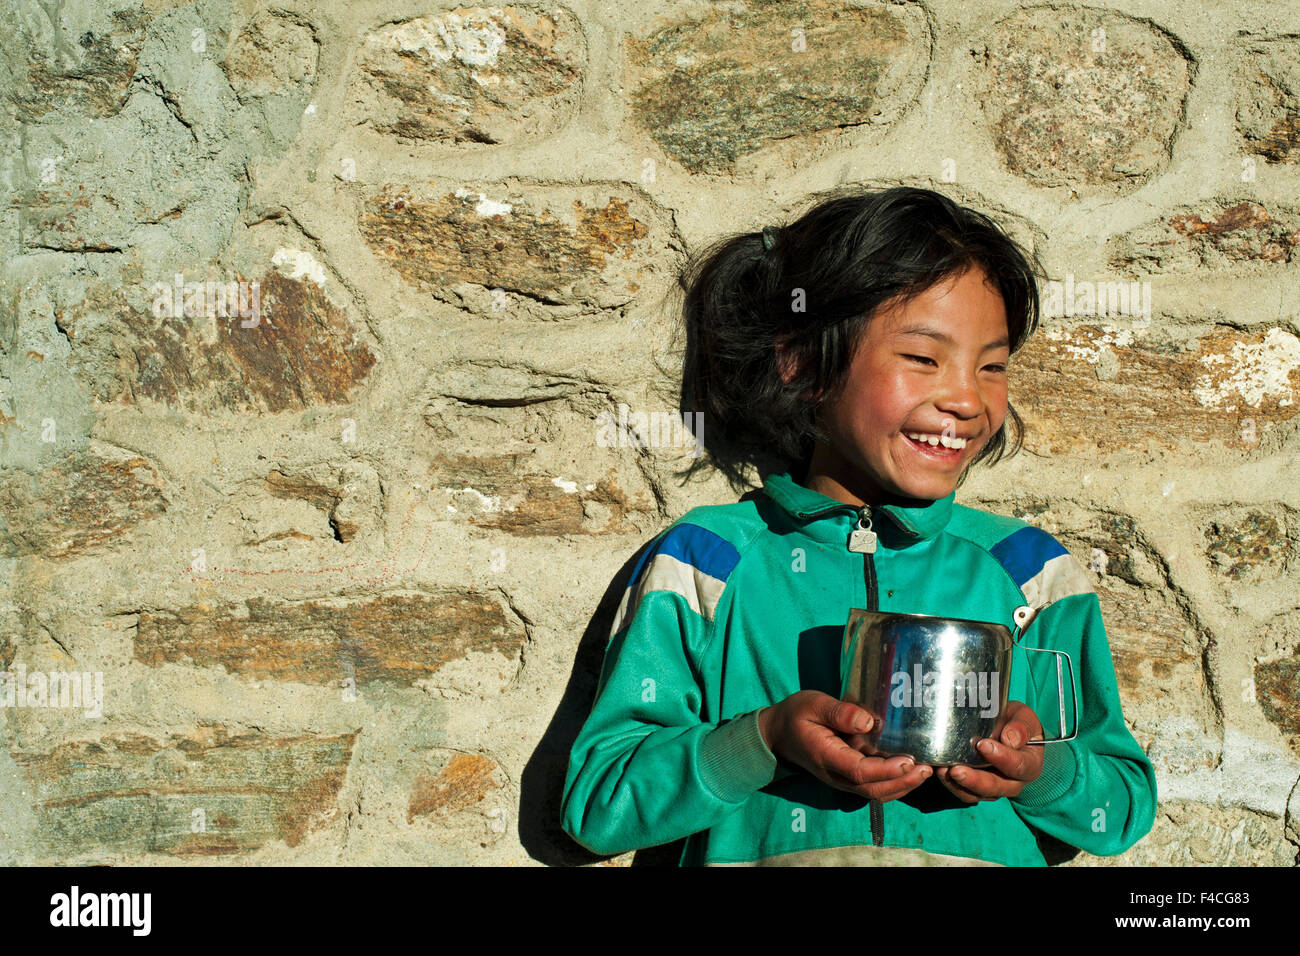 India, West Bengal, Singalila National Park, Tonglu, smiling girl with glass of water Stock Photo